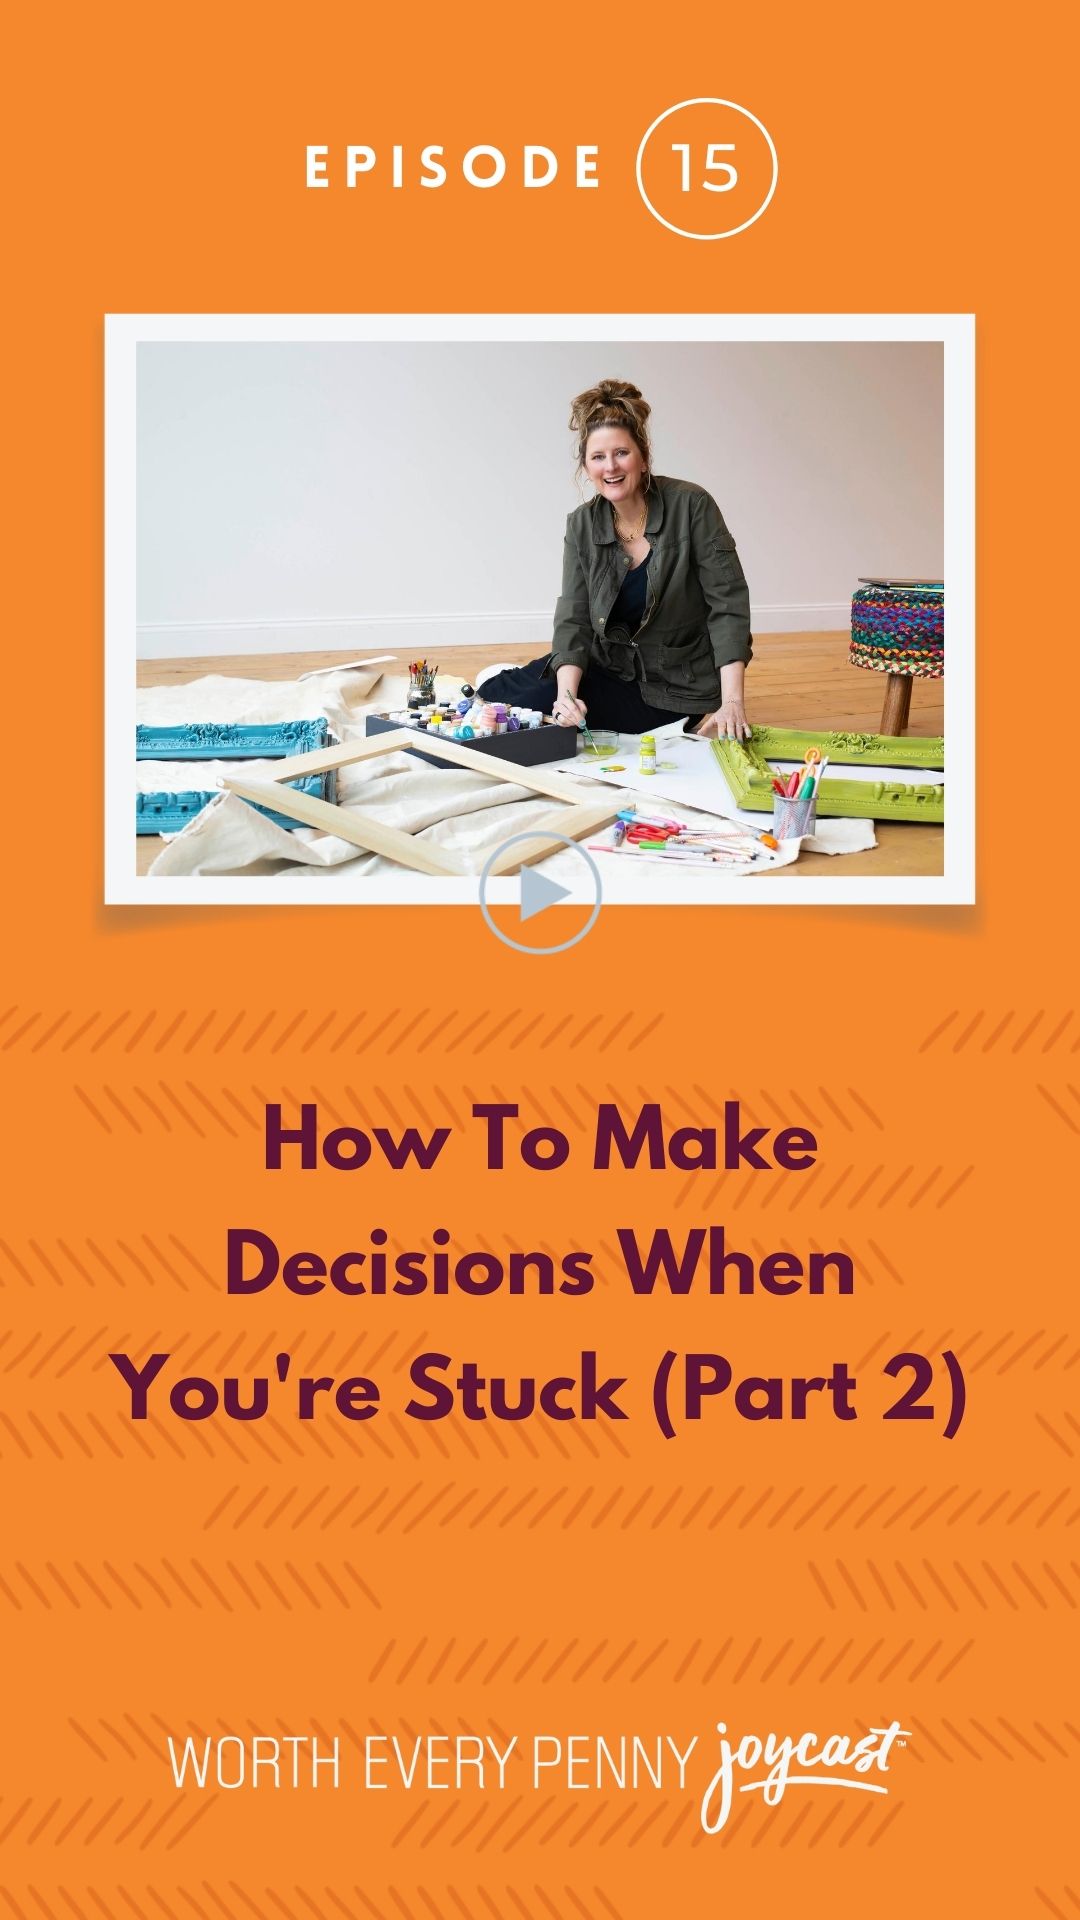 Episode 15: How To Make Decisions When You’re Stuck (Part 2)